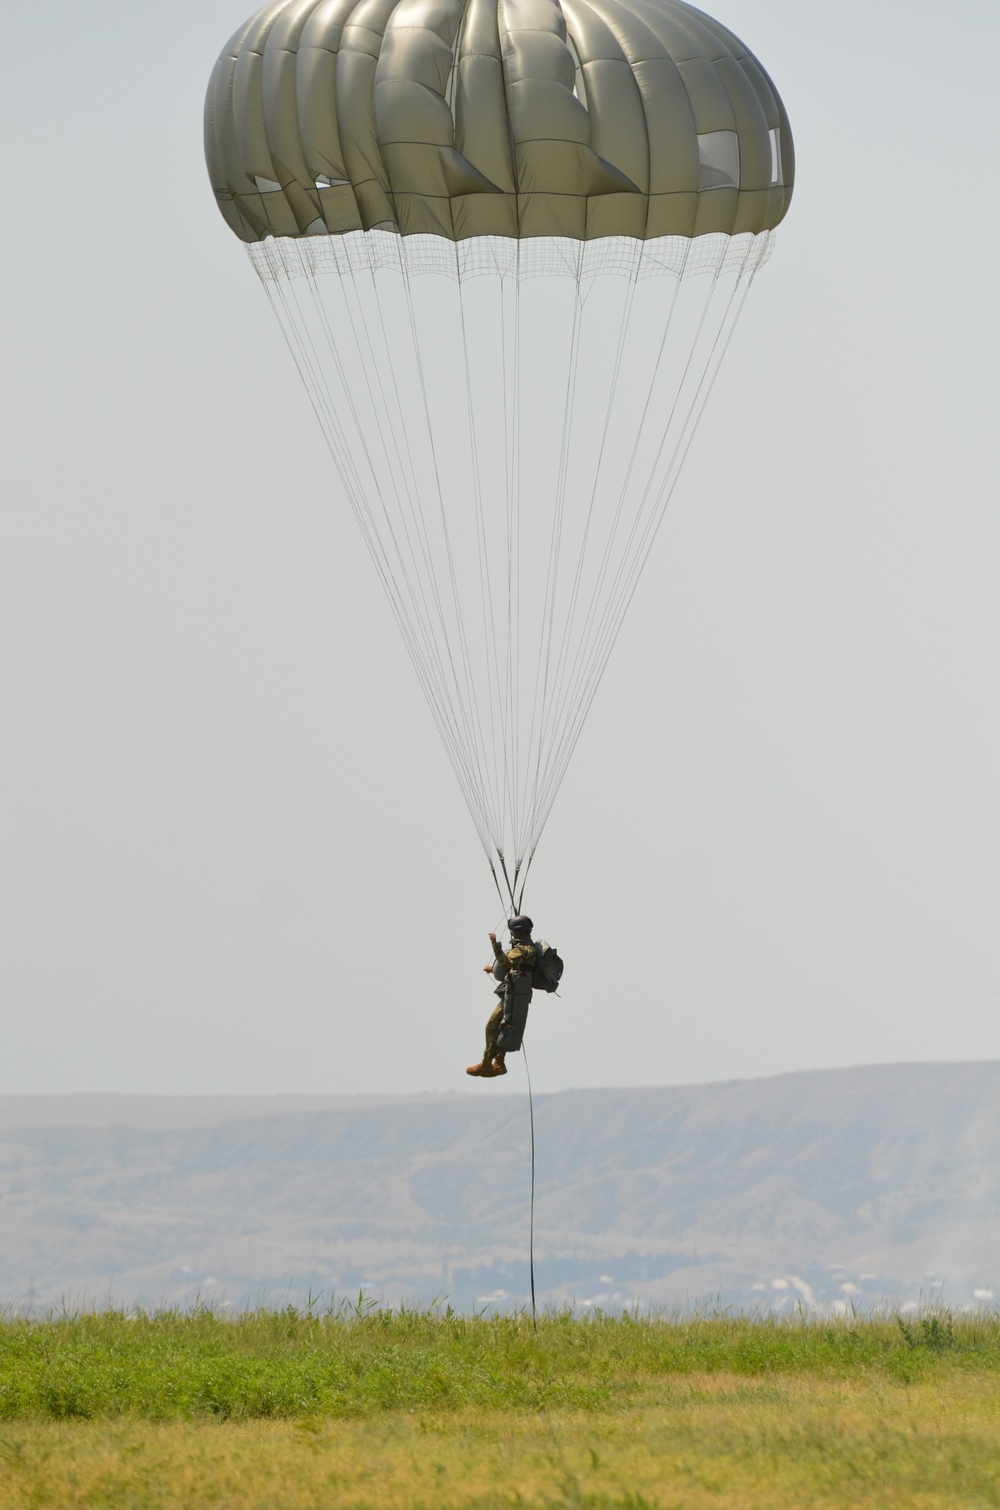 Hotel Company conducts airborne insertion with Georgia's Special Operations Forces